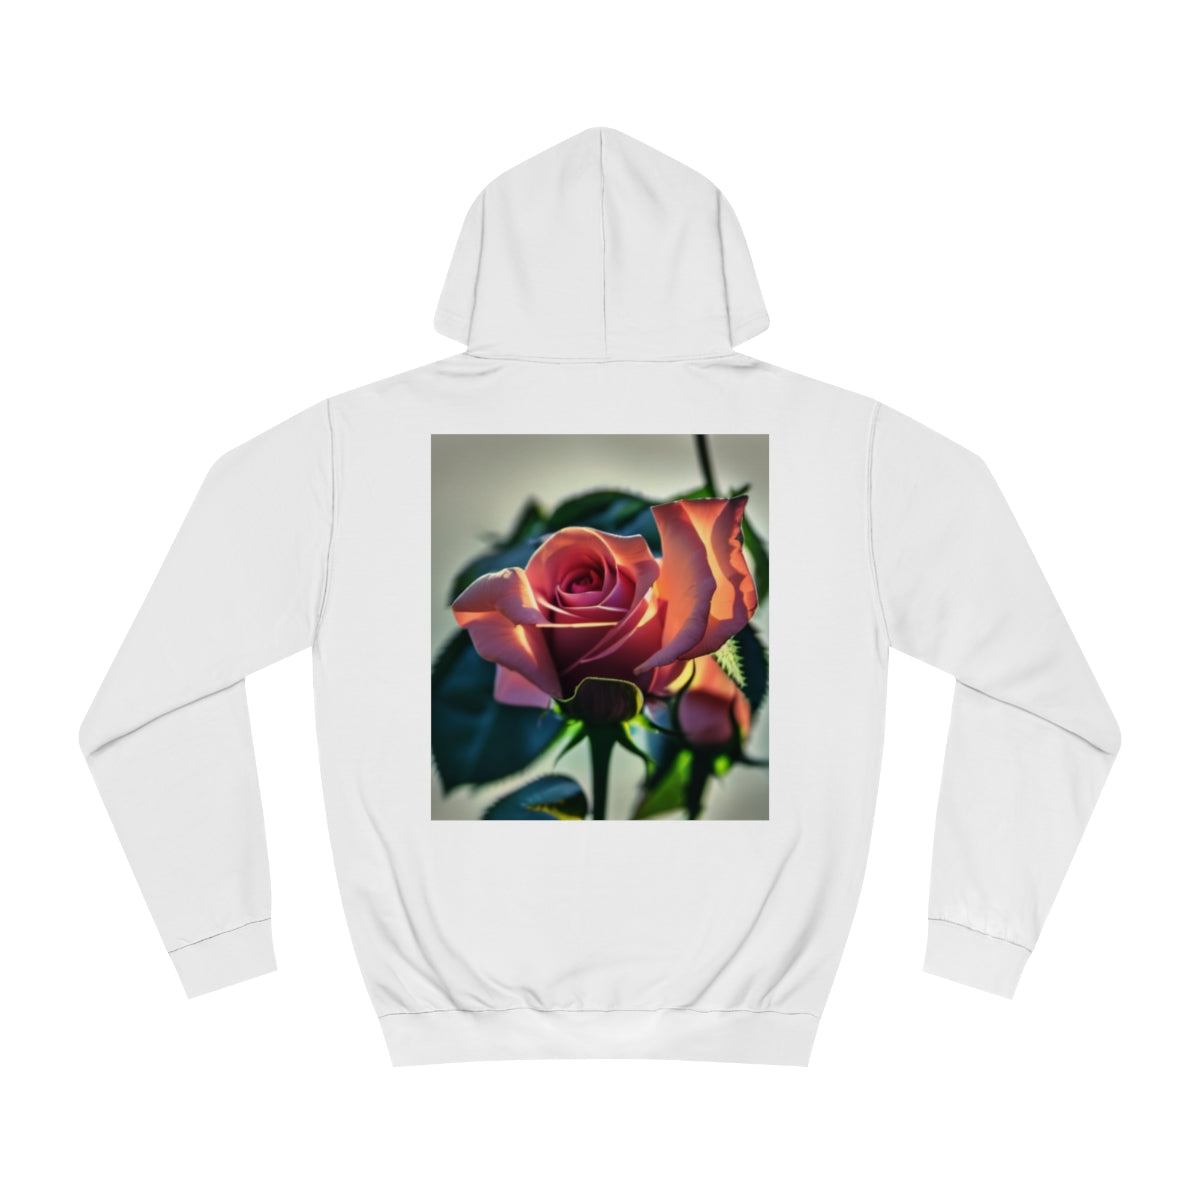 The Perfect Rose - Unisex College Hoodie